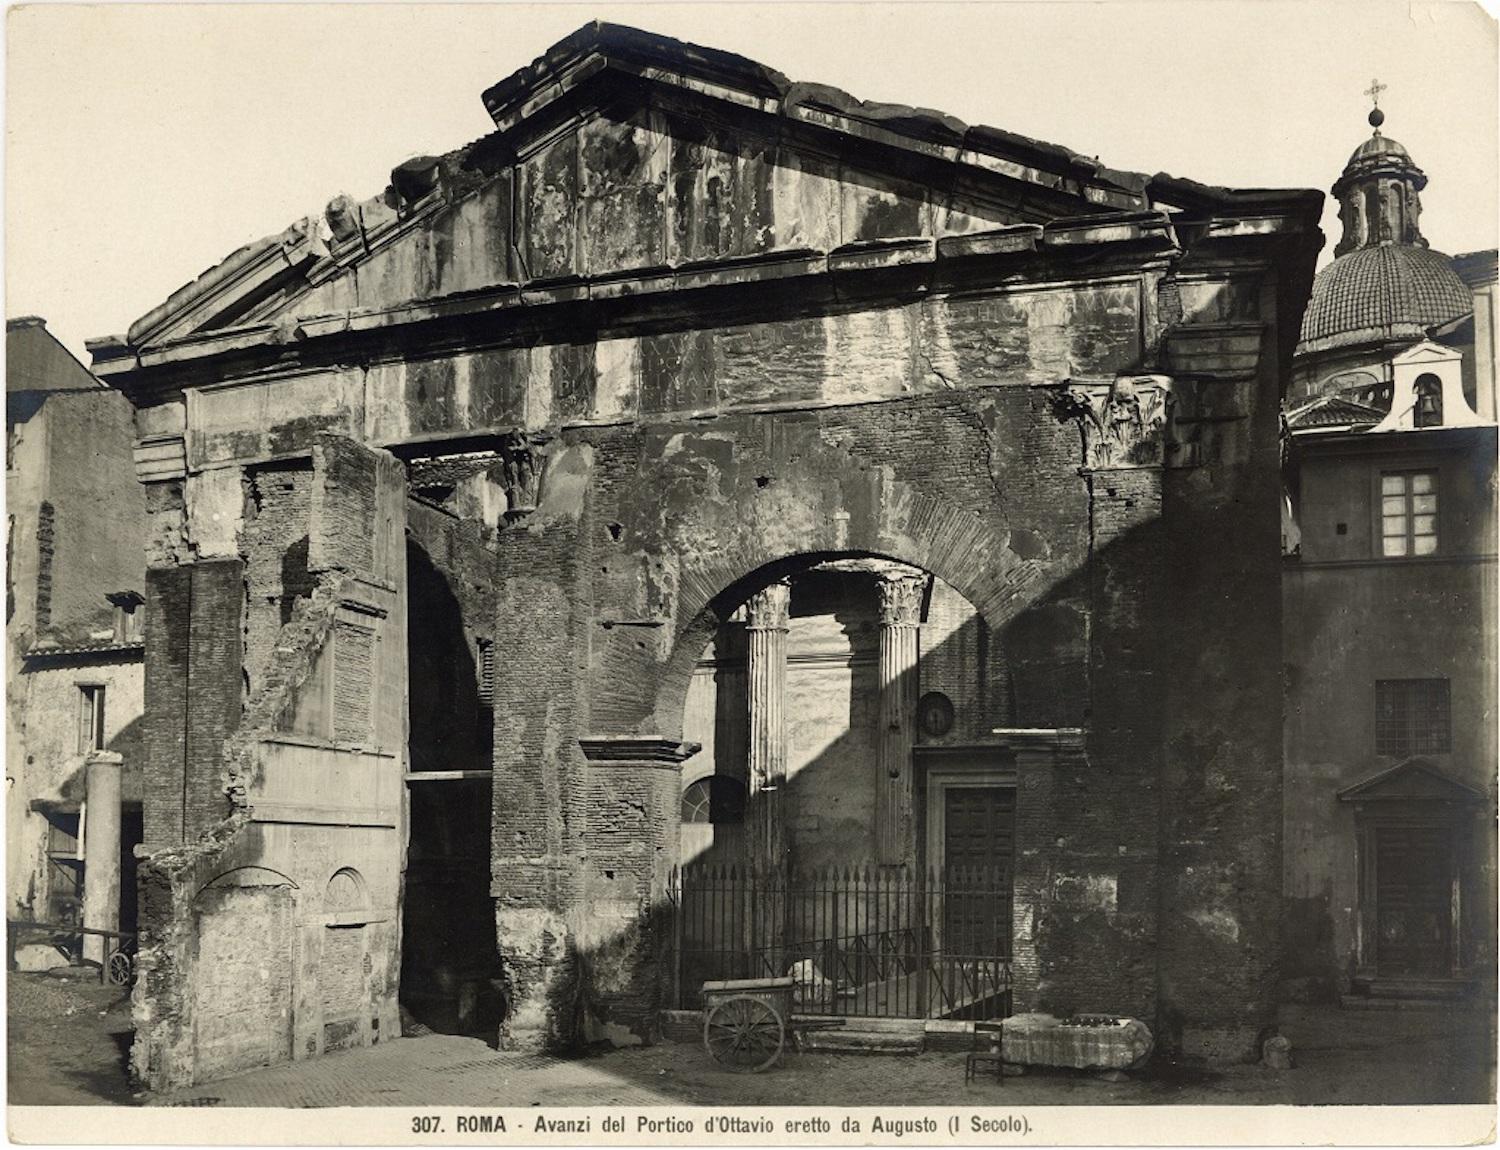 Unknown Landscape Photograph - Two Vintage Views of the Ghetto in Rome by Studio Vasari - 1920s